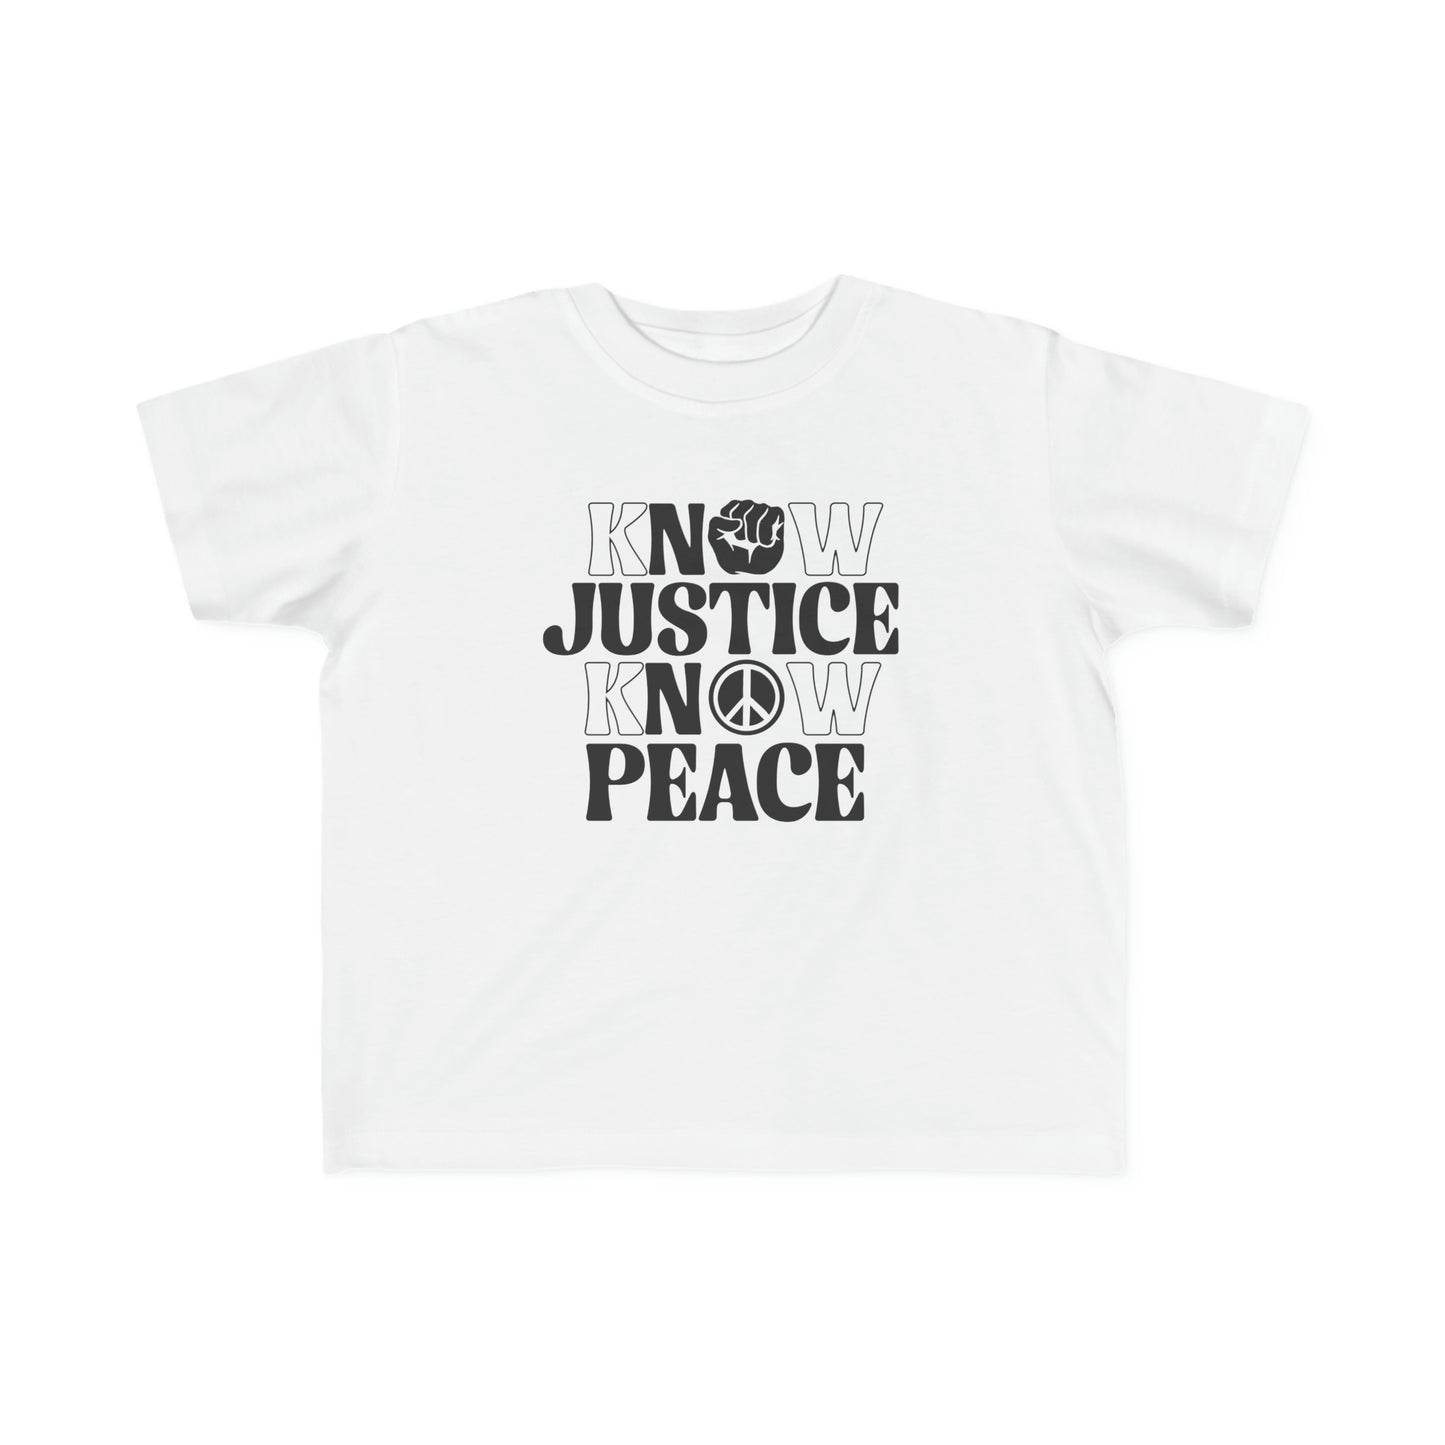 “Know Justice, Know Peace (Classic)” Toddler's Tee